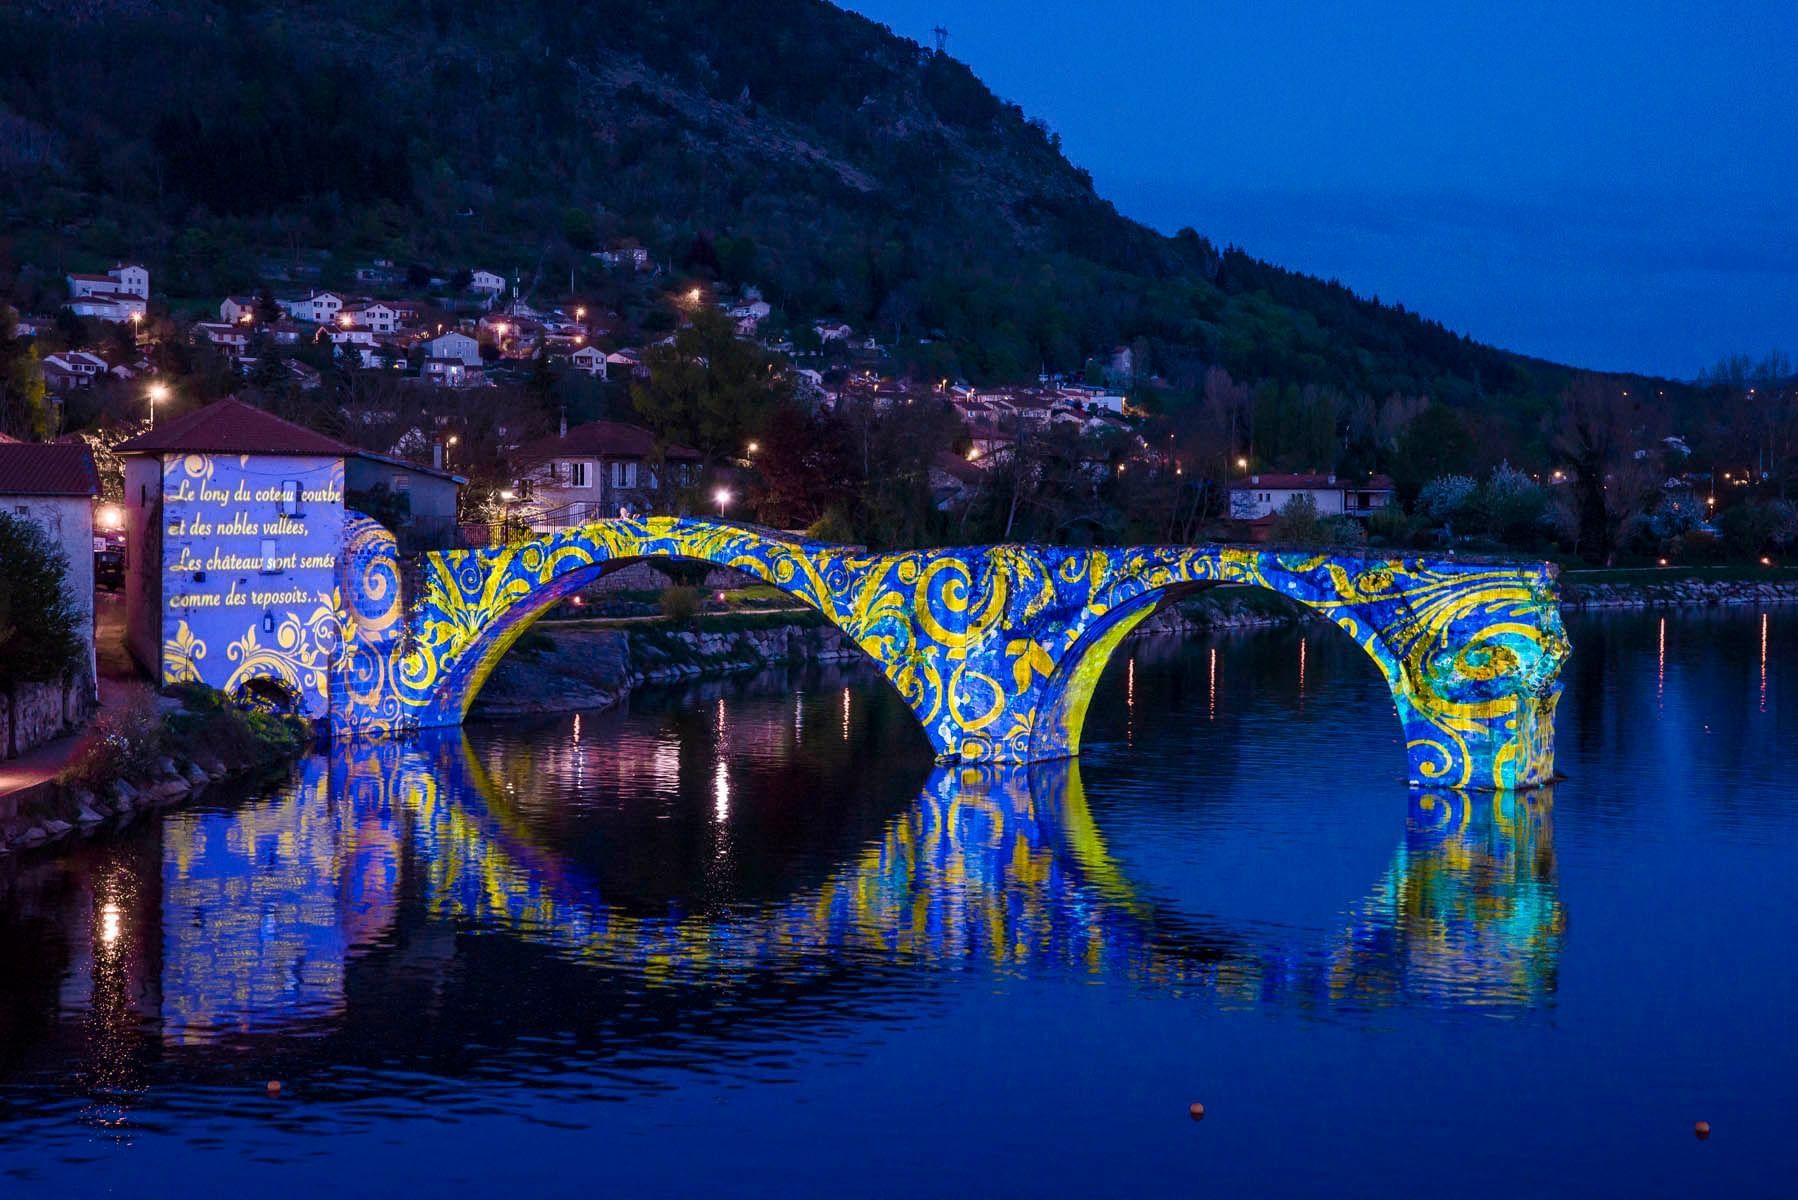 A bridge decroated with colorful lights near a river in Bristol